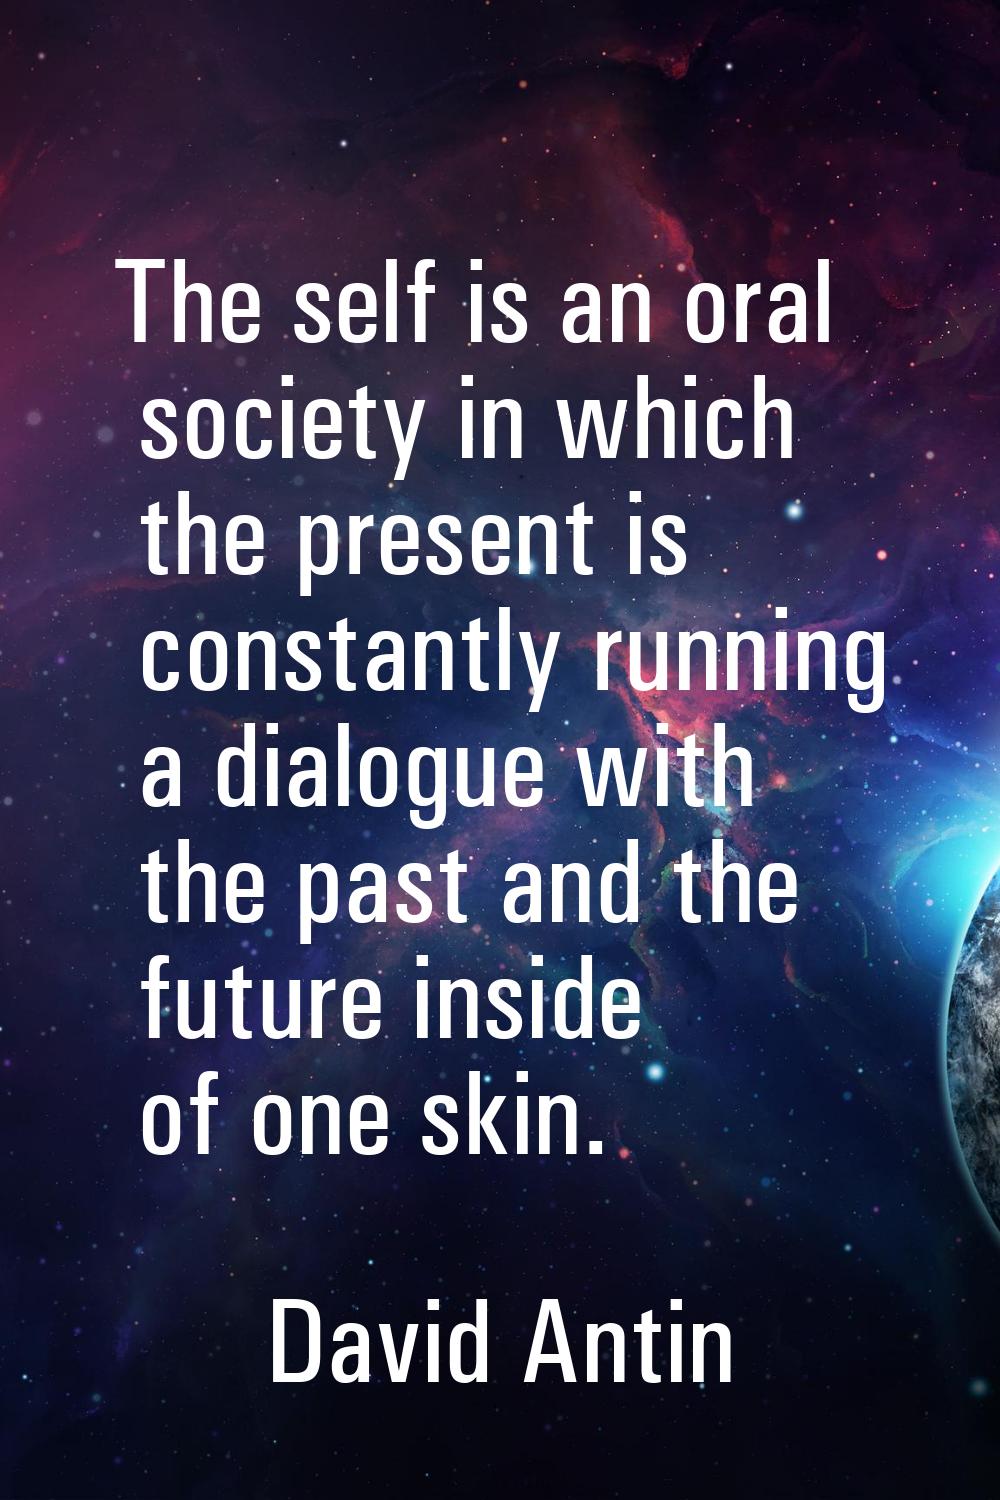 The self is an oral society in which the present is constantly running a dialogue with the past and